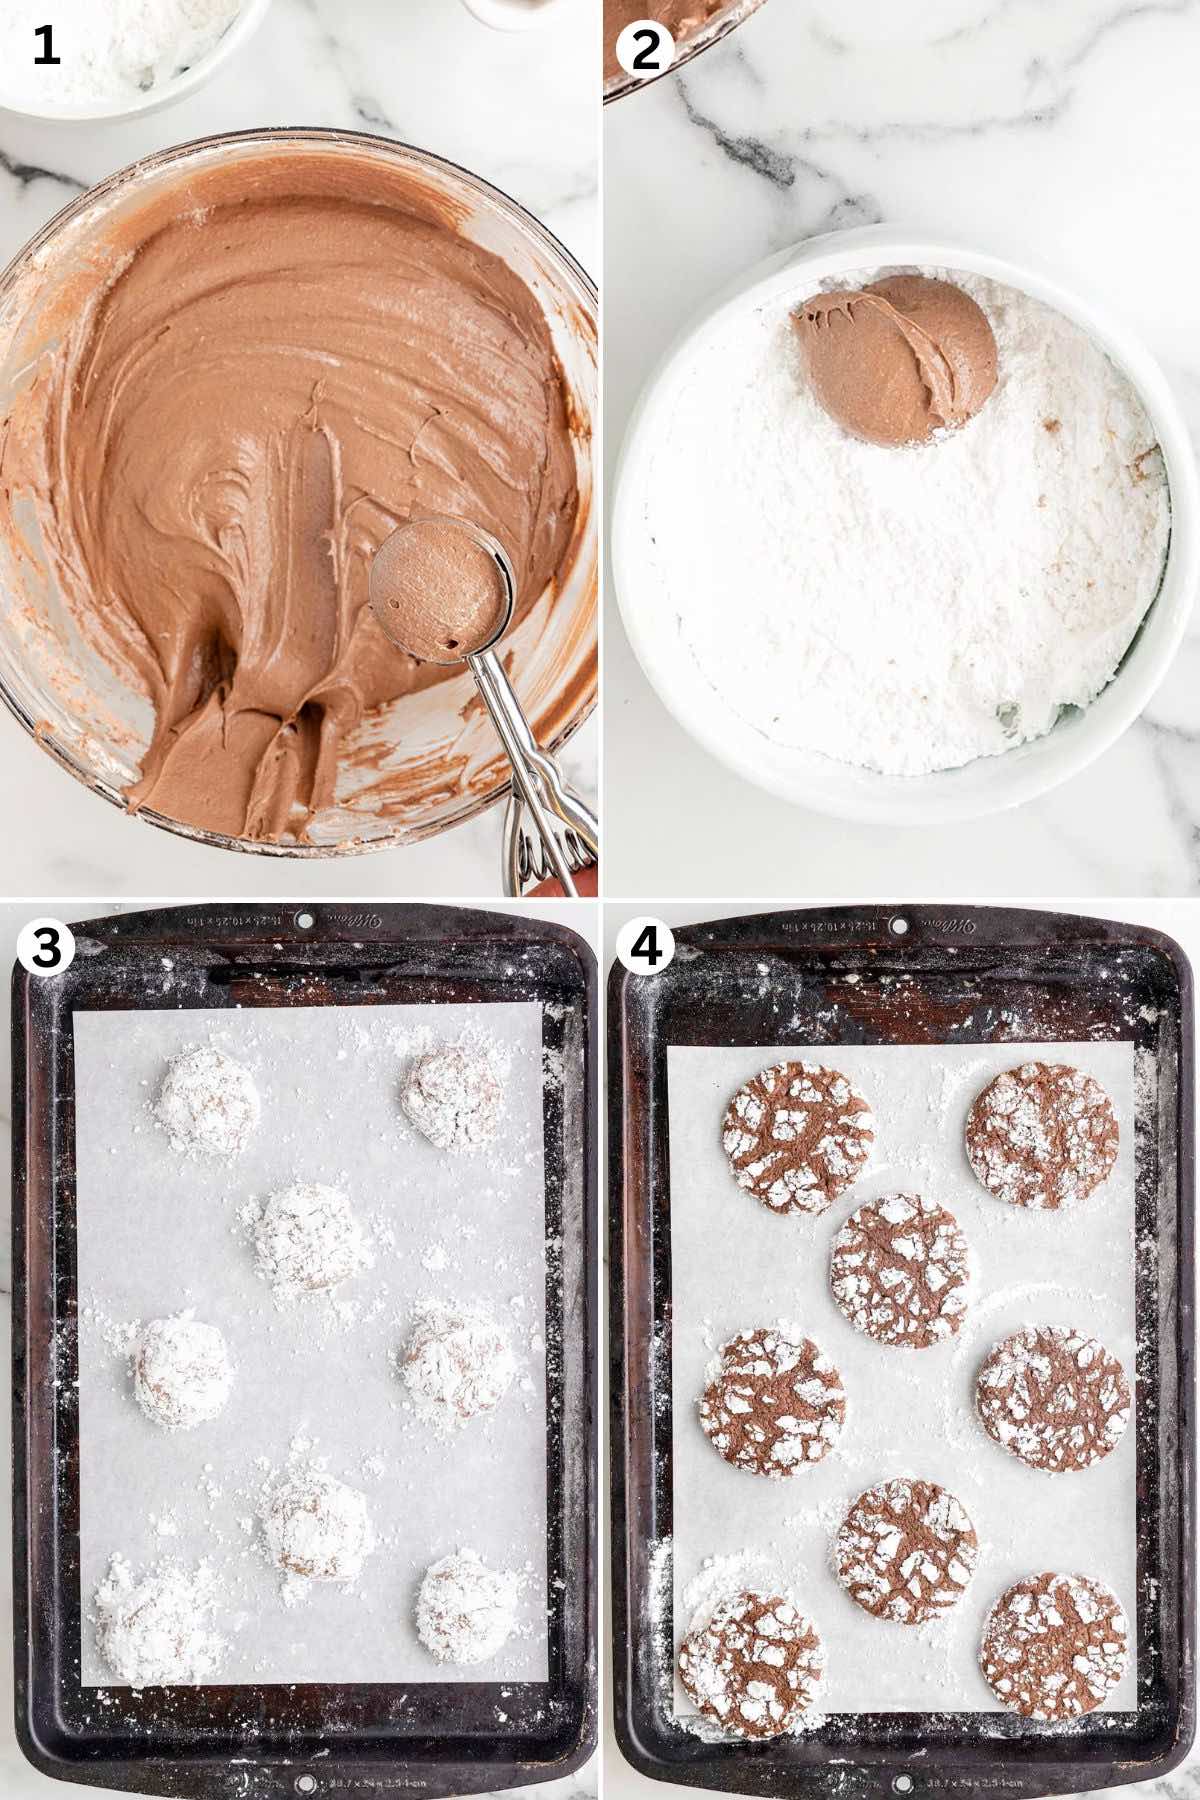 combine ingredients in a bowl. scoop the cookie dough balls and roll in the powdered sugar. Place the cookies onto a sheet pan. Bake.